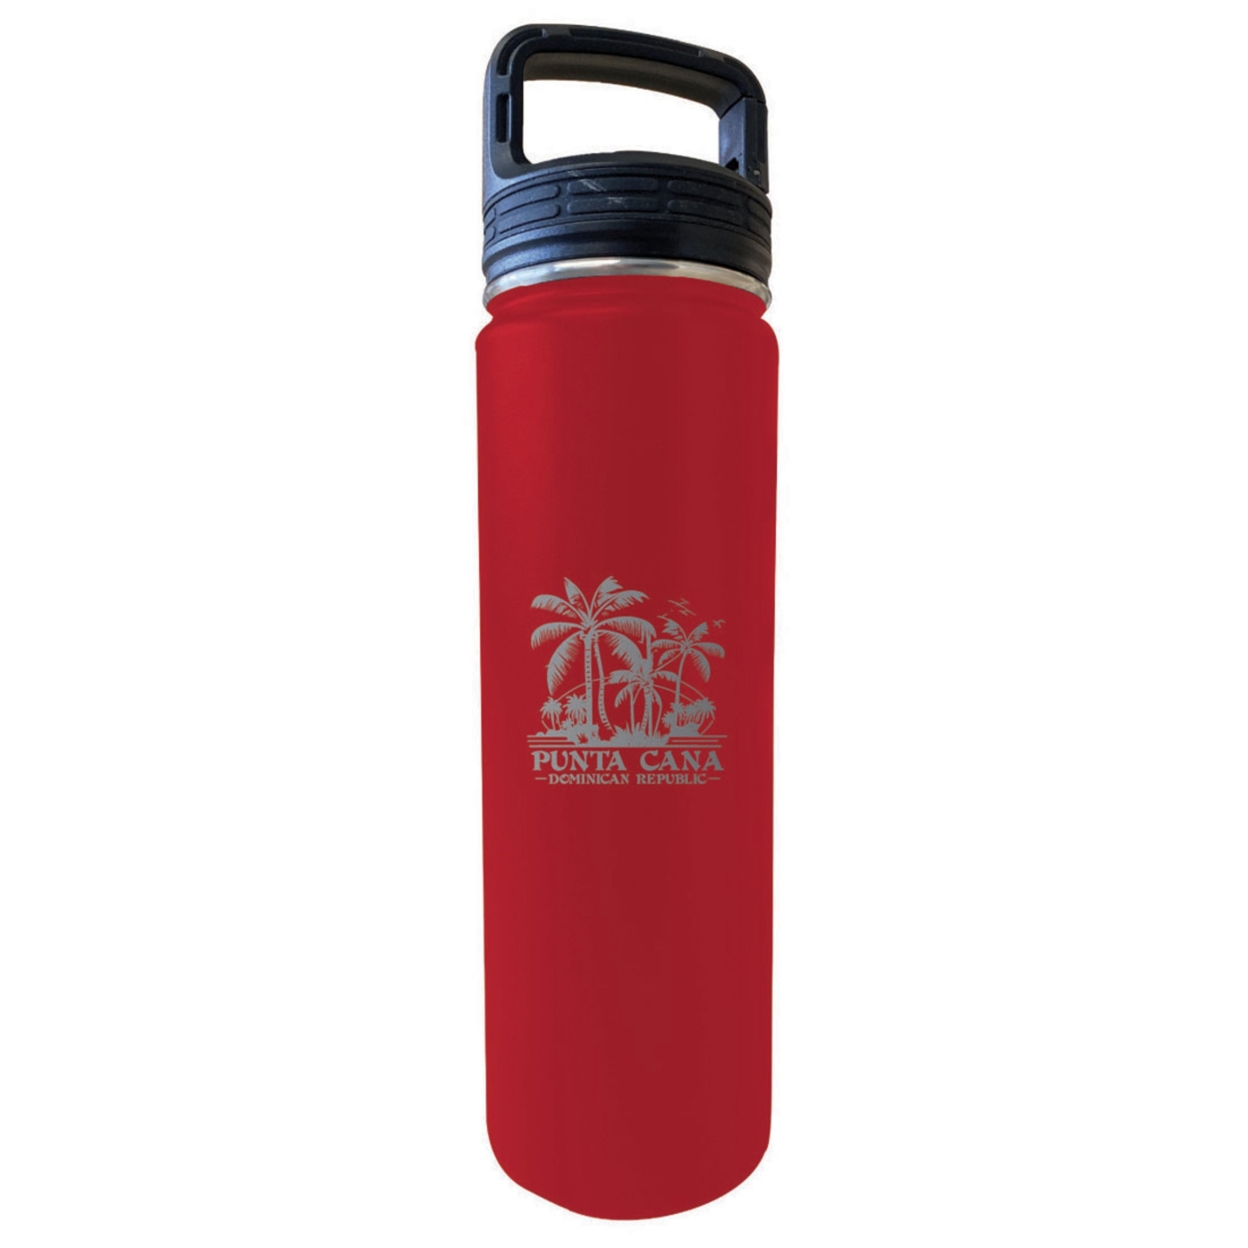 Punta Cana Dominican Republic Souvenir 32 Oz Insulated Stainless Steel Tumbler - White, Parrot